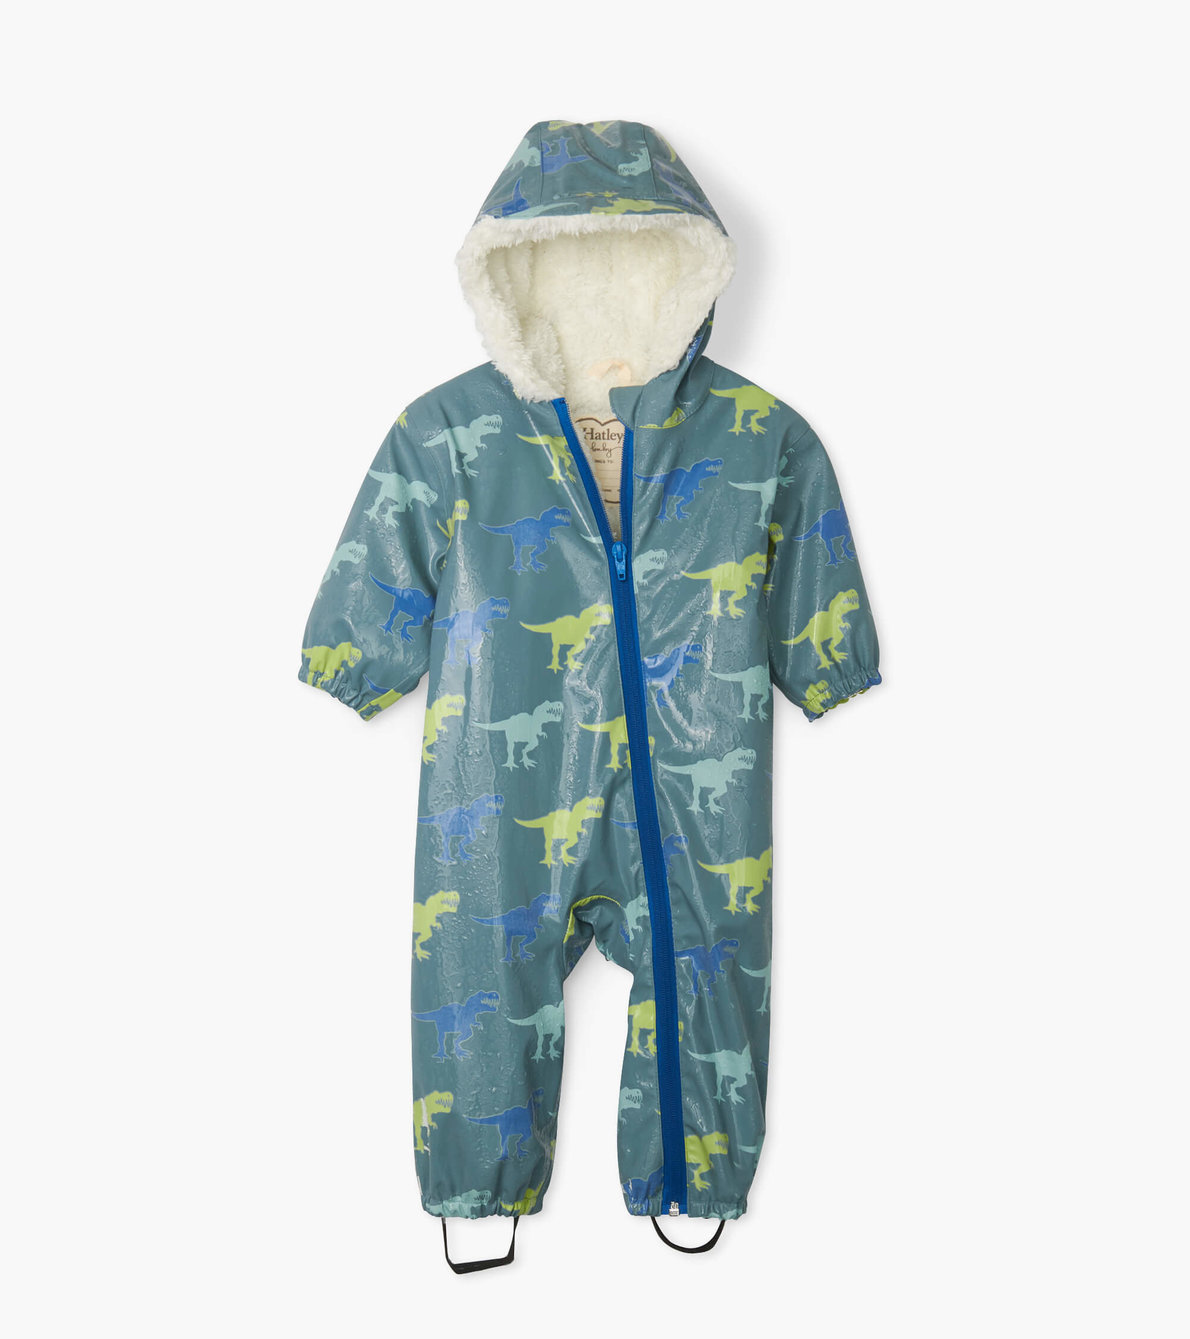 View larger image of T-Rex Sherpa Lined Colour Changing Baby Rain Suit